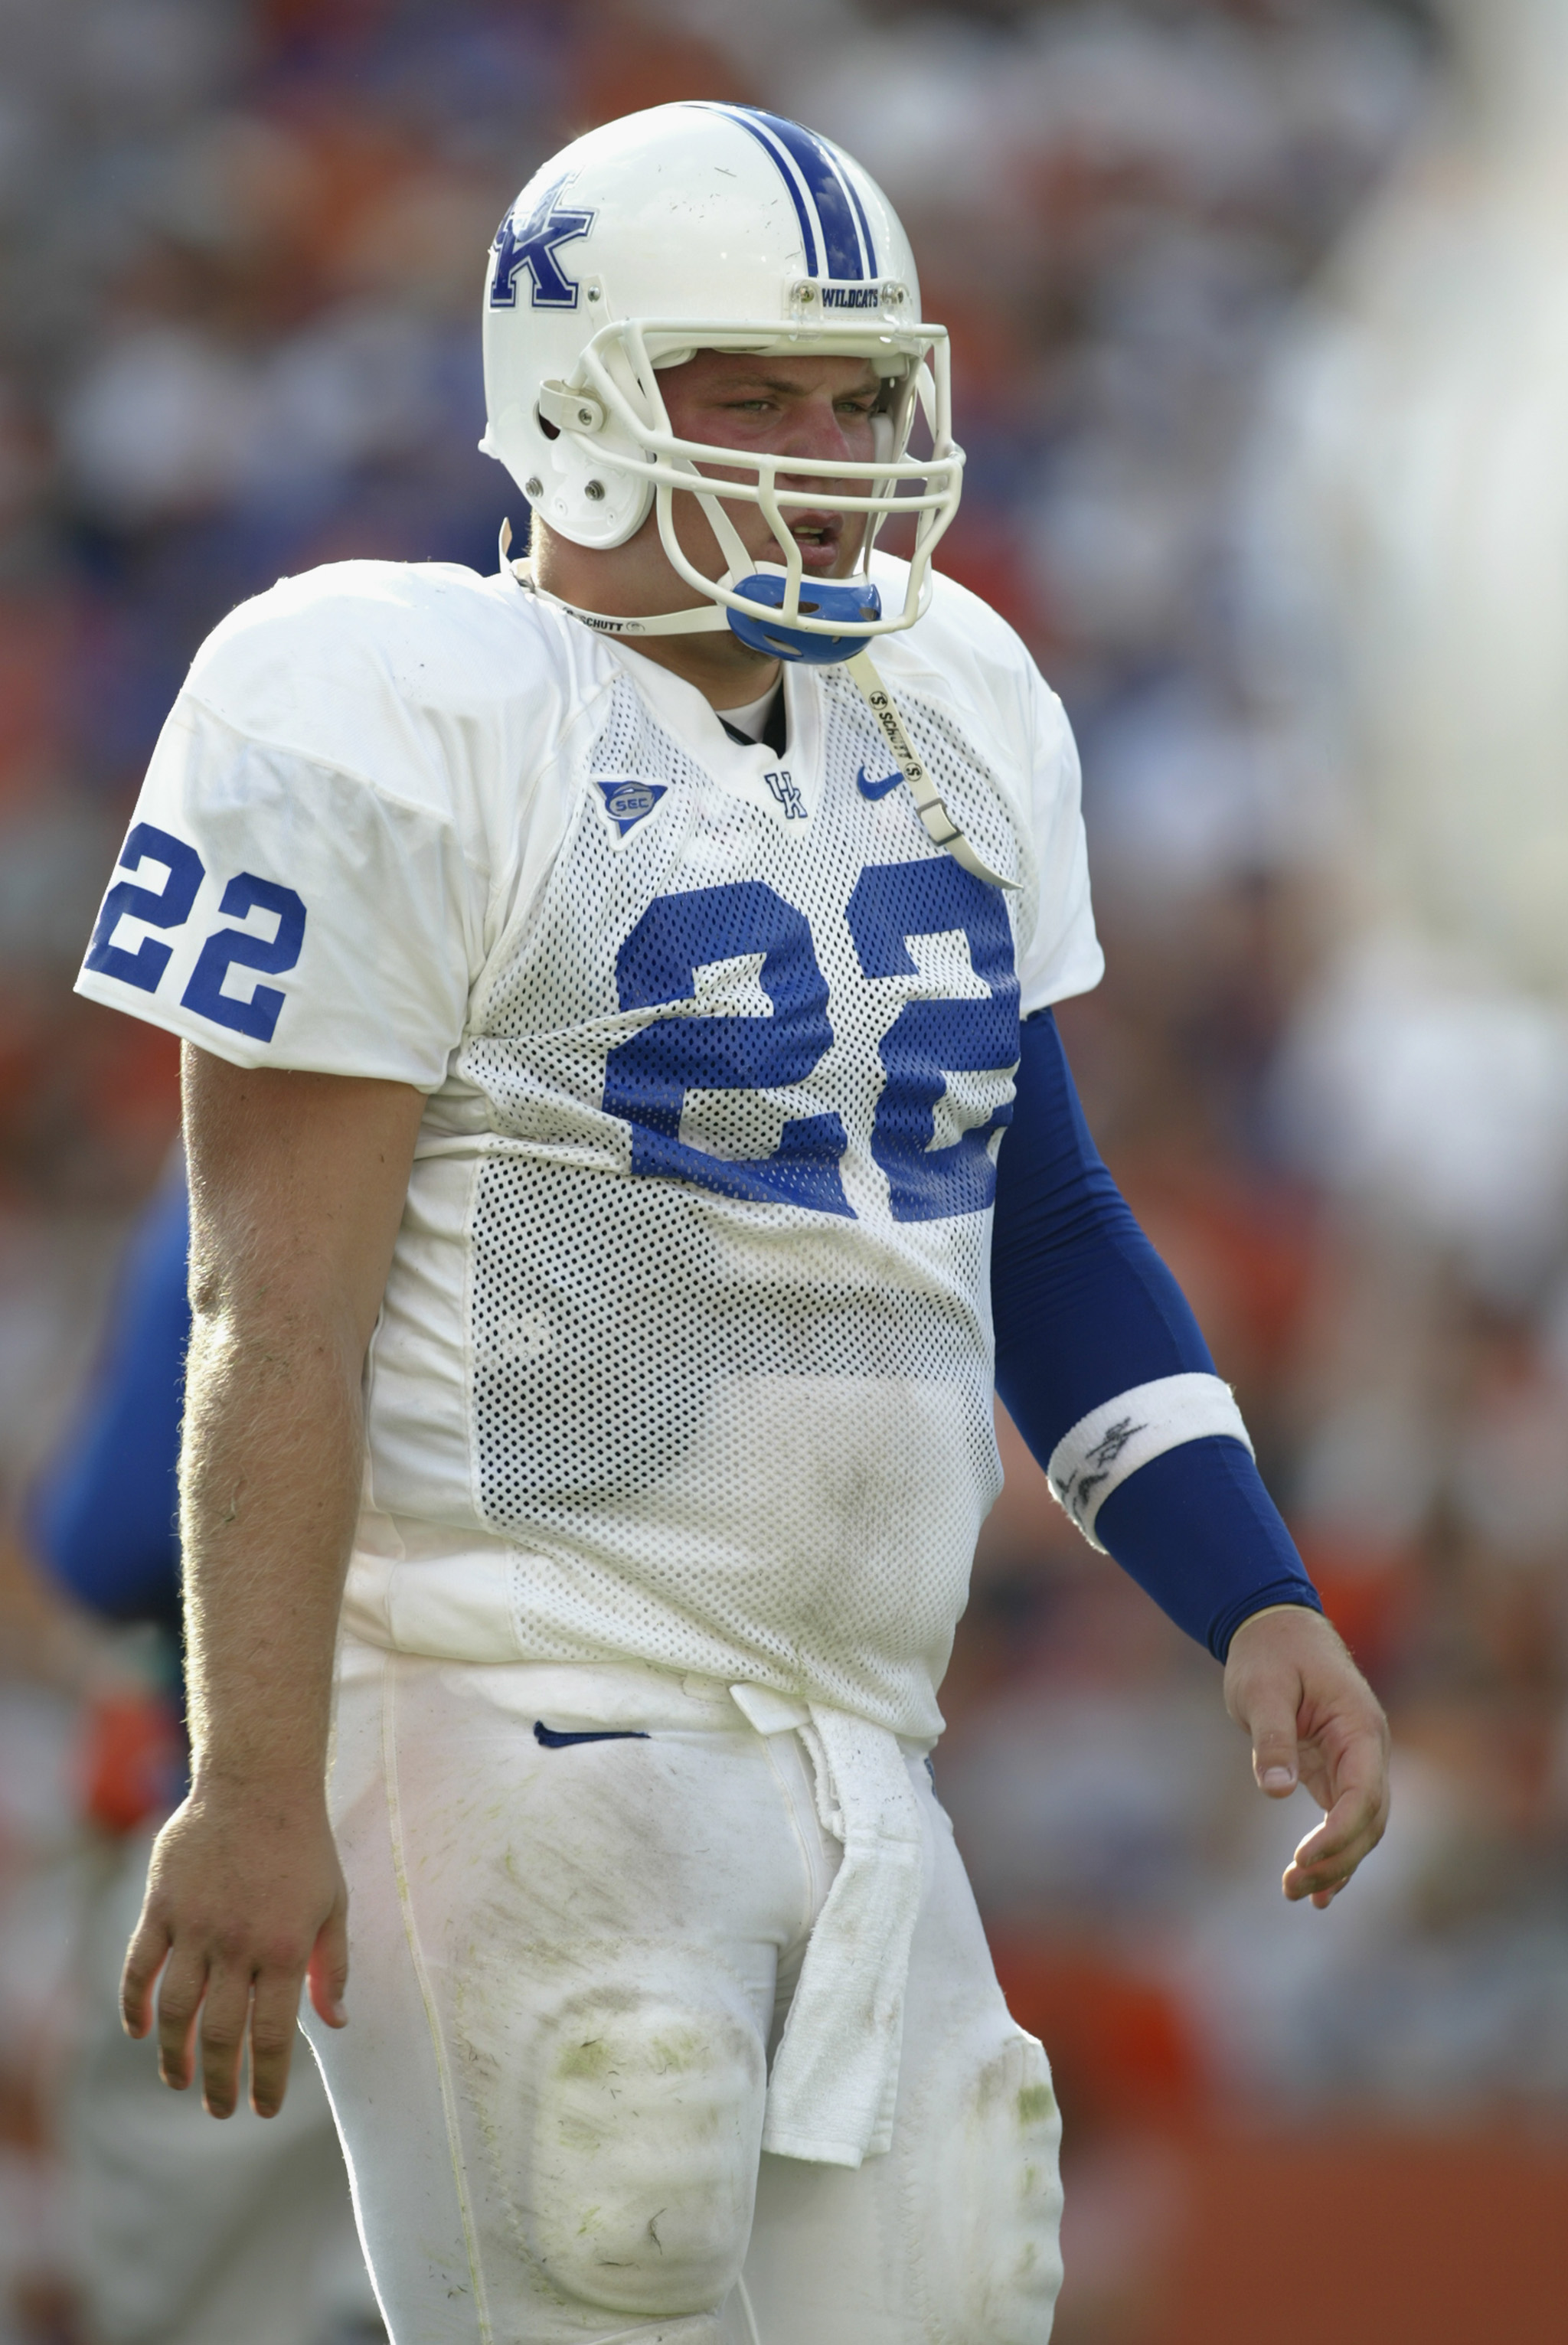 GAINESVILLE, FL - SEPTEMBER 28:  Quarterback Jared Lorenzen #22 of the Kentucky Wildcats stands on the field during the Southeastern Conference football game against the Florida Gators on September 28, 2002 at Florida Field in Gainesville, Florida.  The G